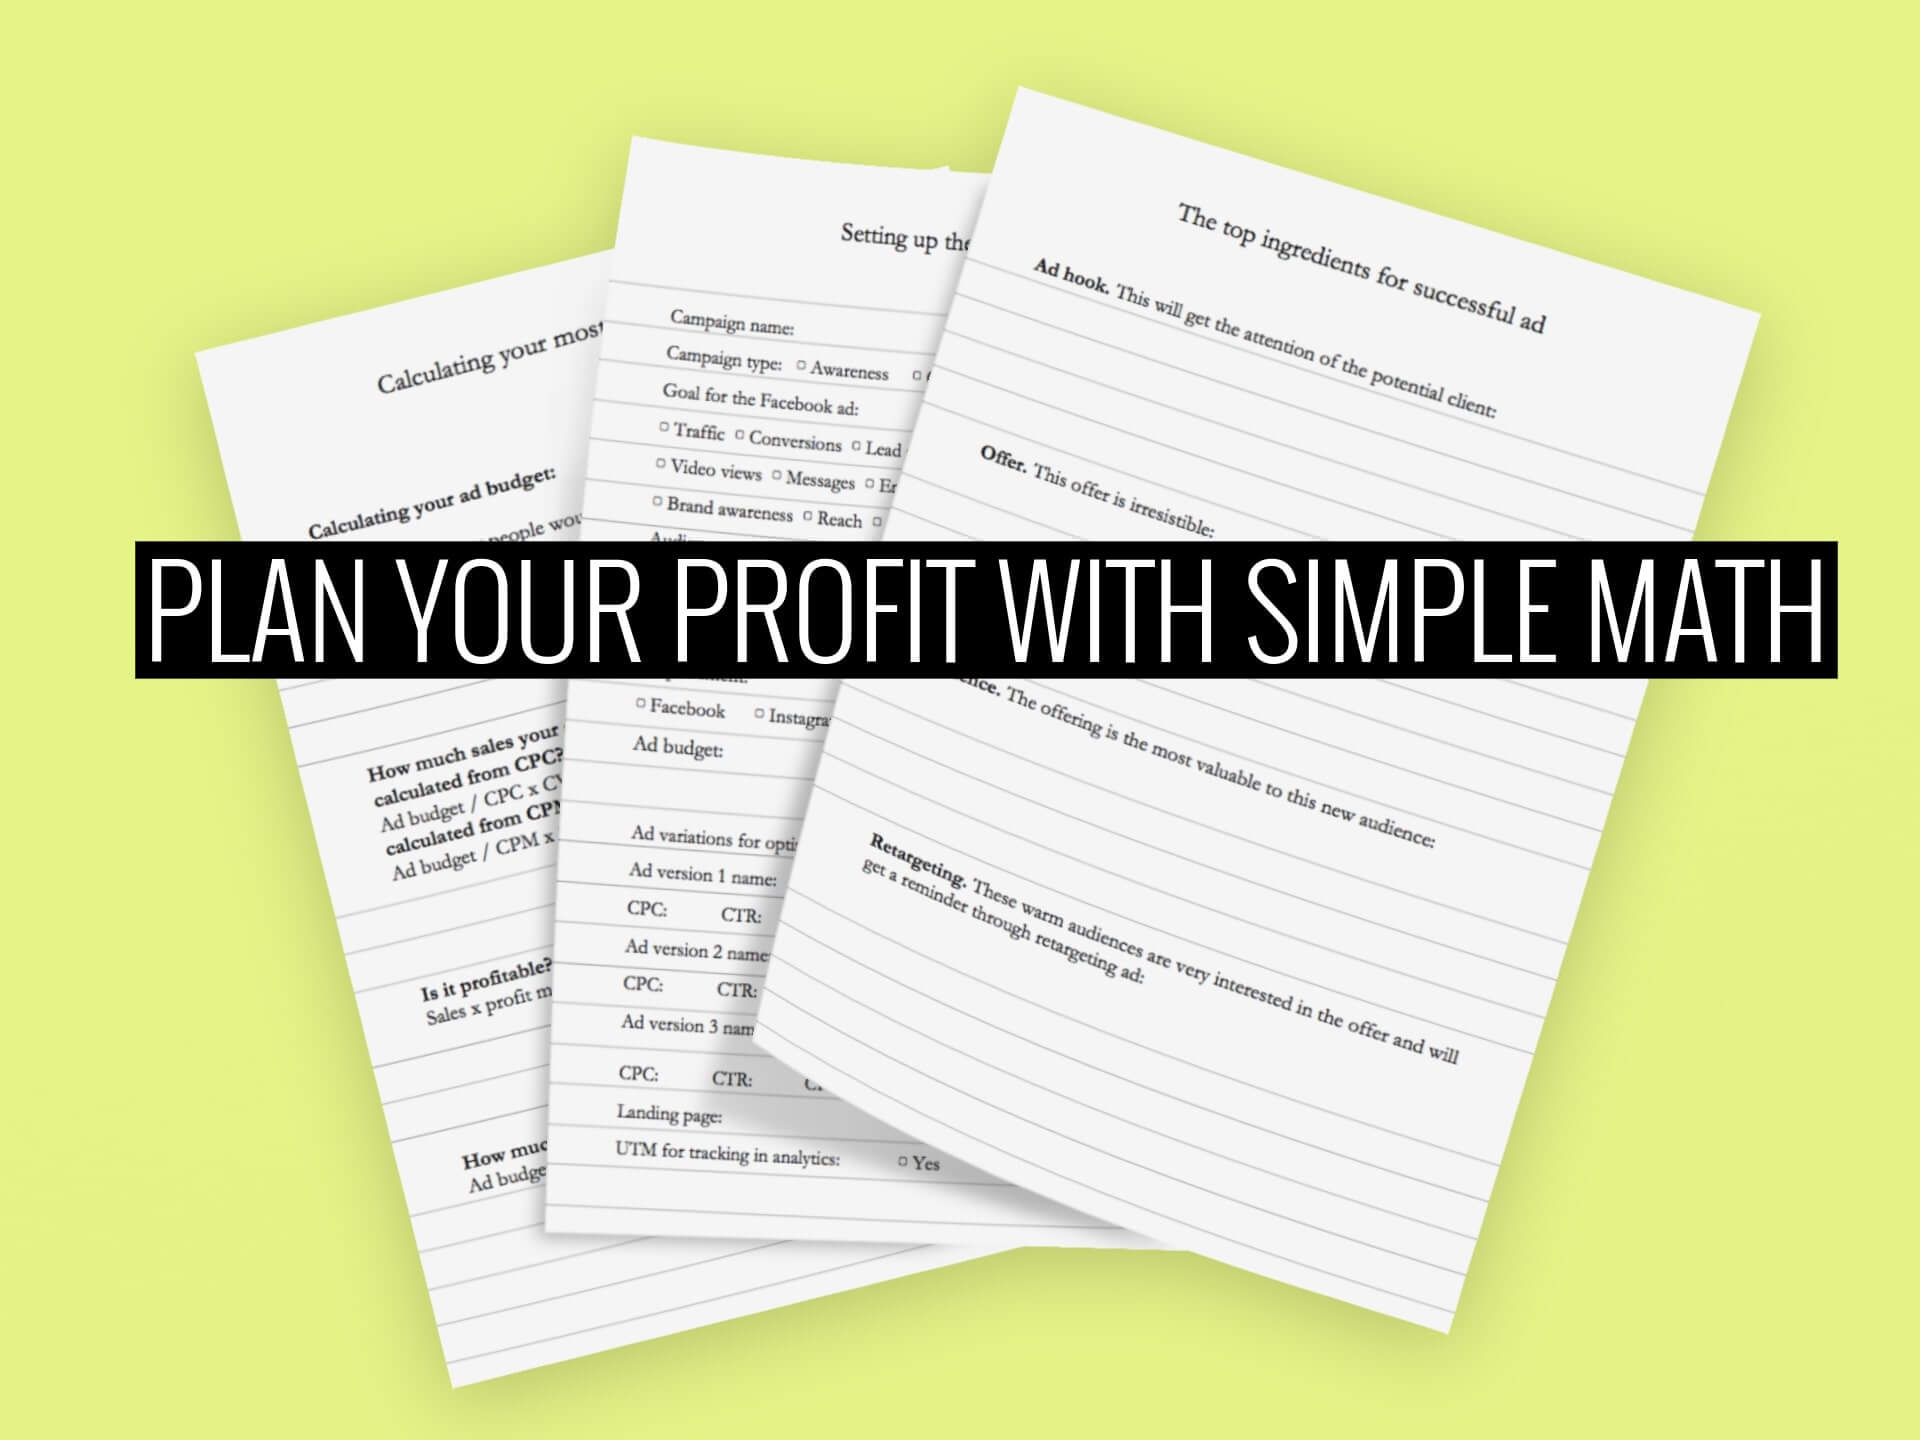 Plan your Facebook ad profit with simple math